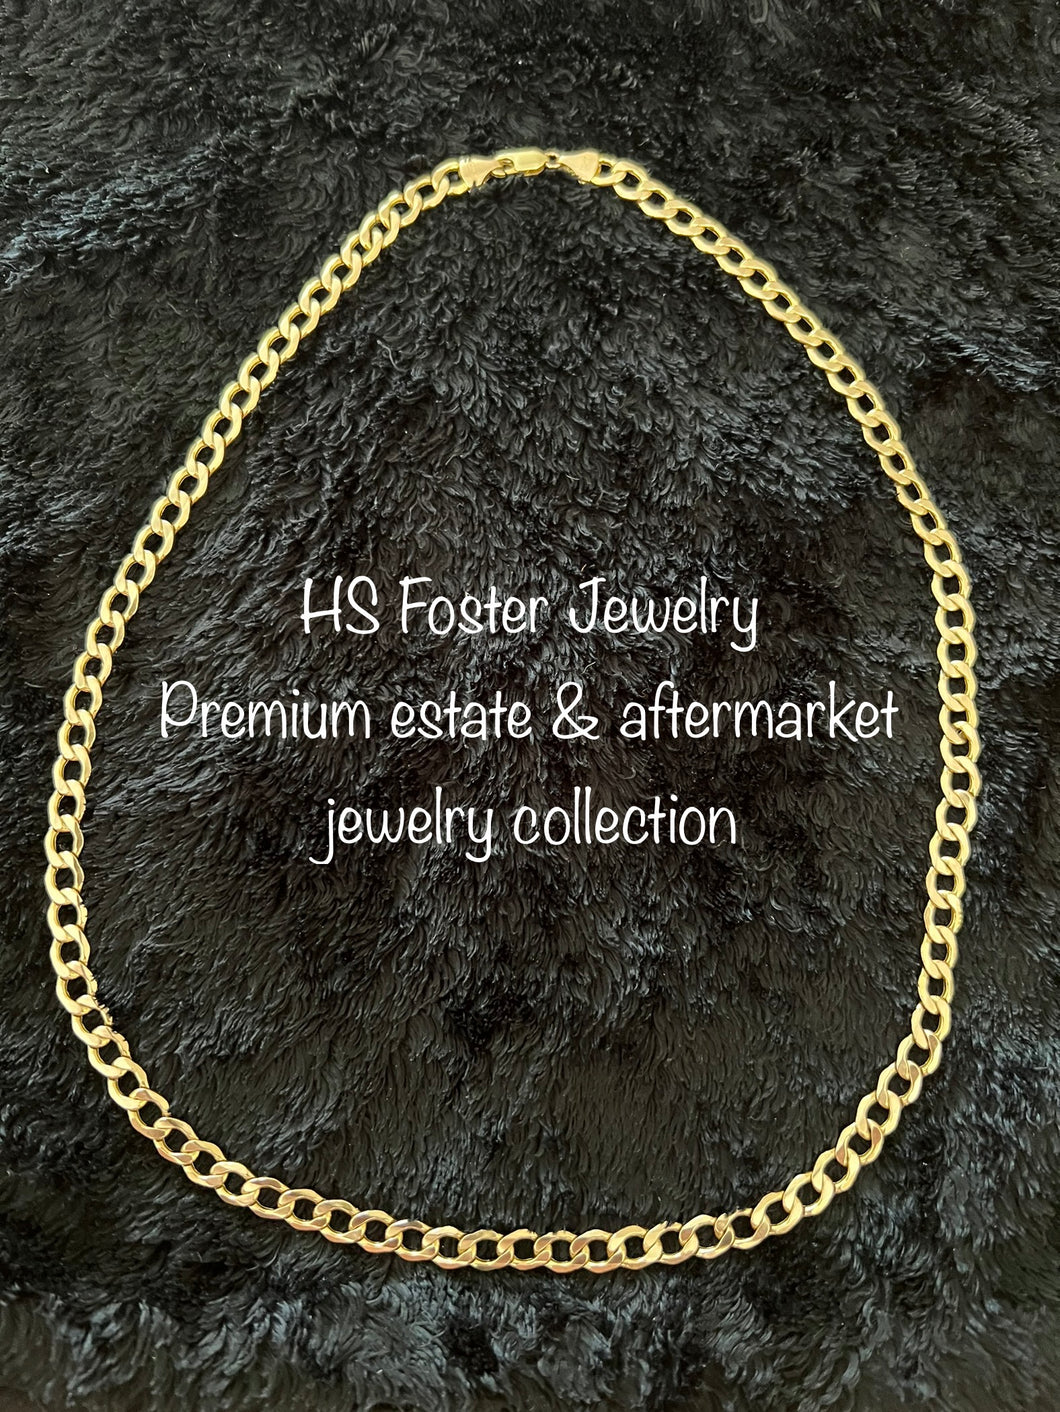 Premium estate & aftermarket jewelry collection